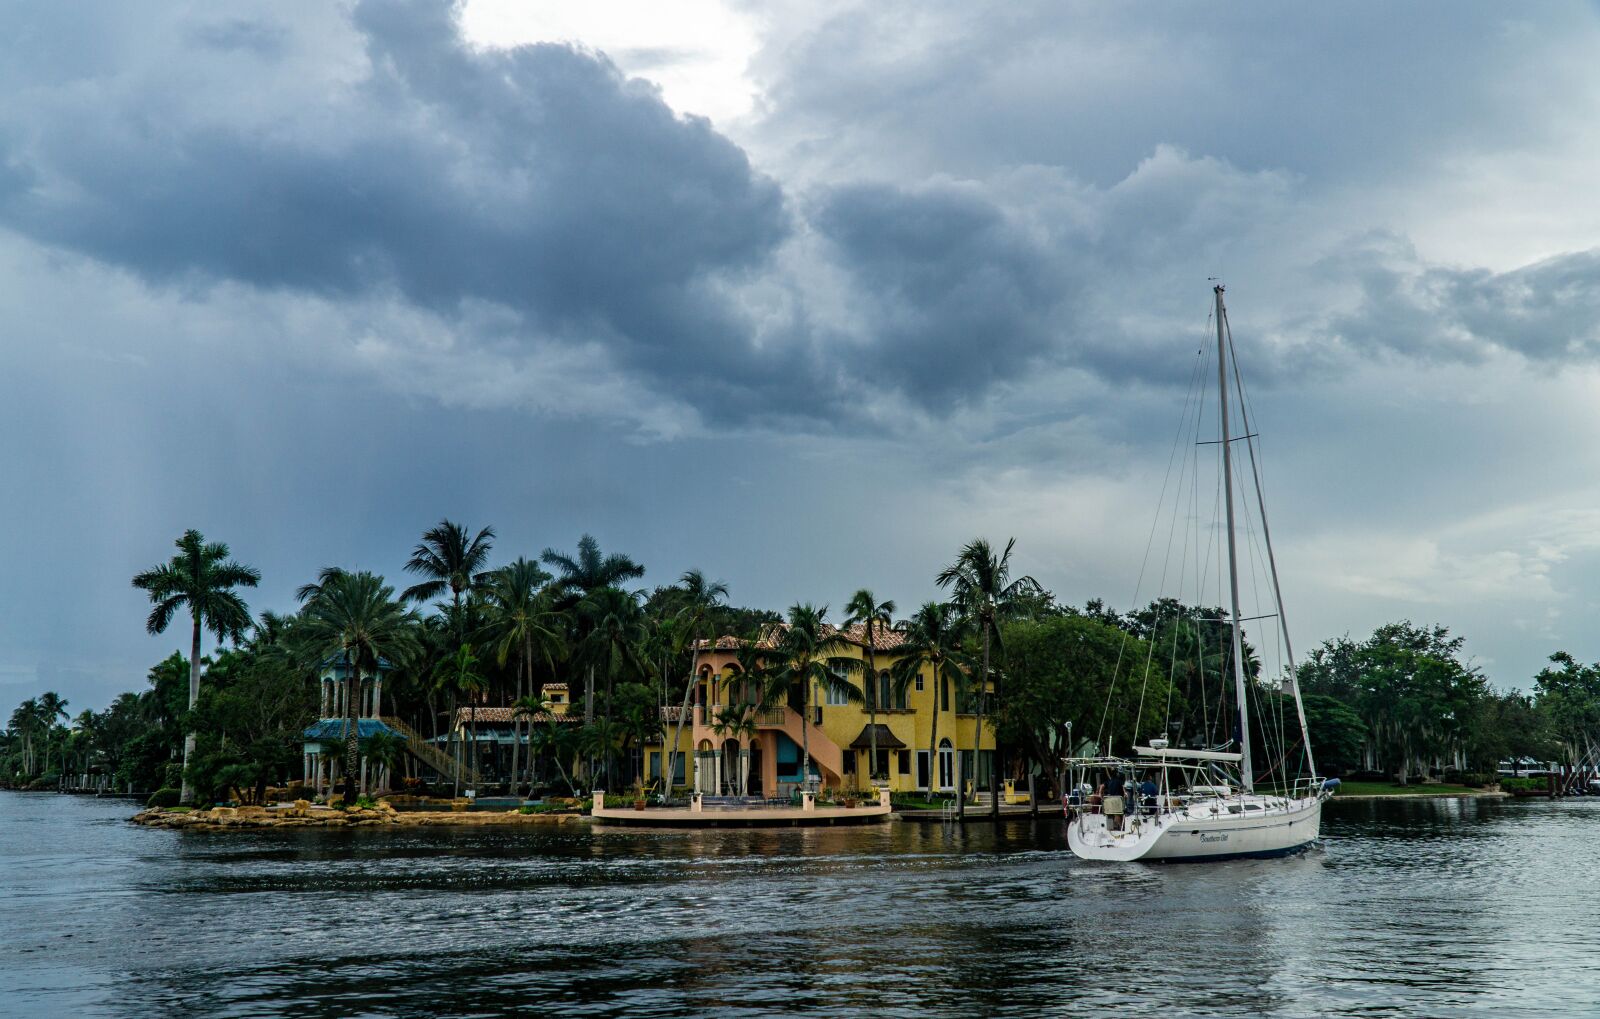 Sony a6000 sample photo. Clouds, sailboat, intracoastal photography